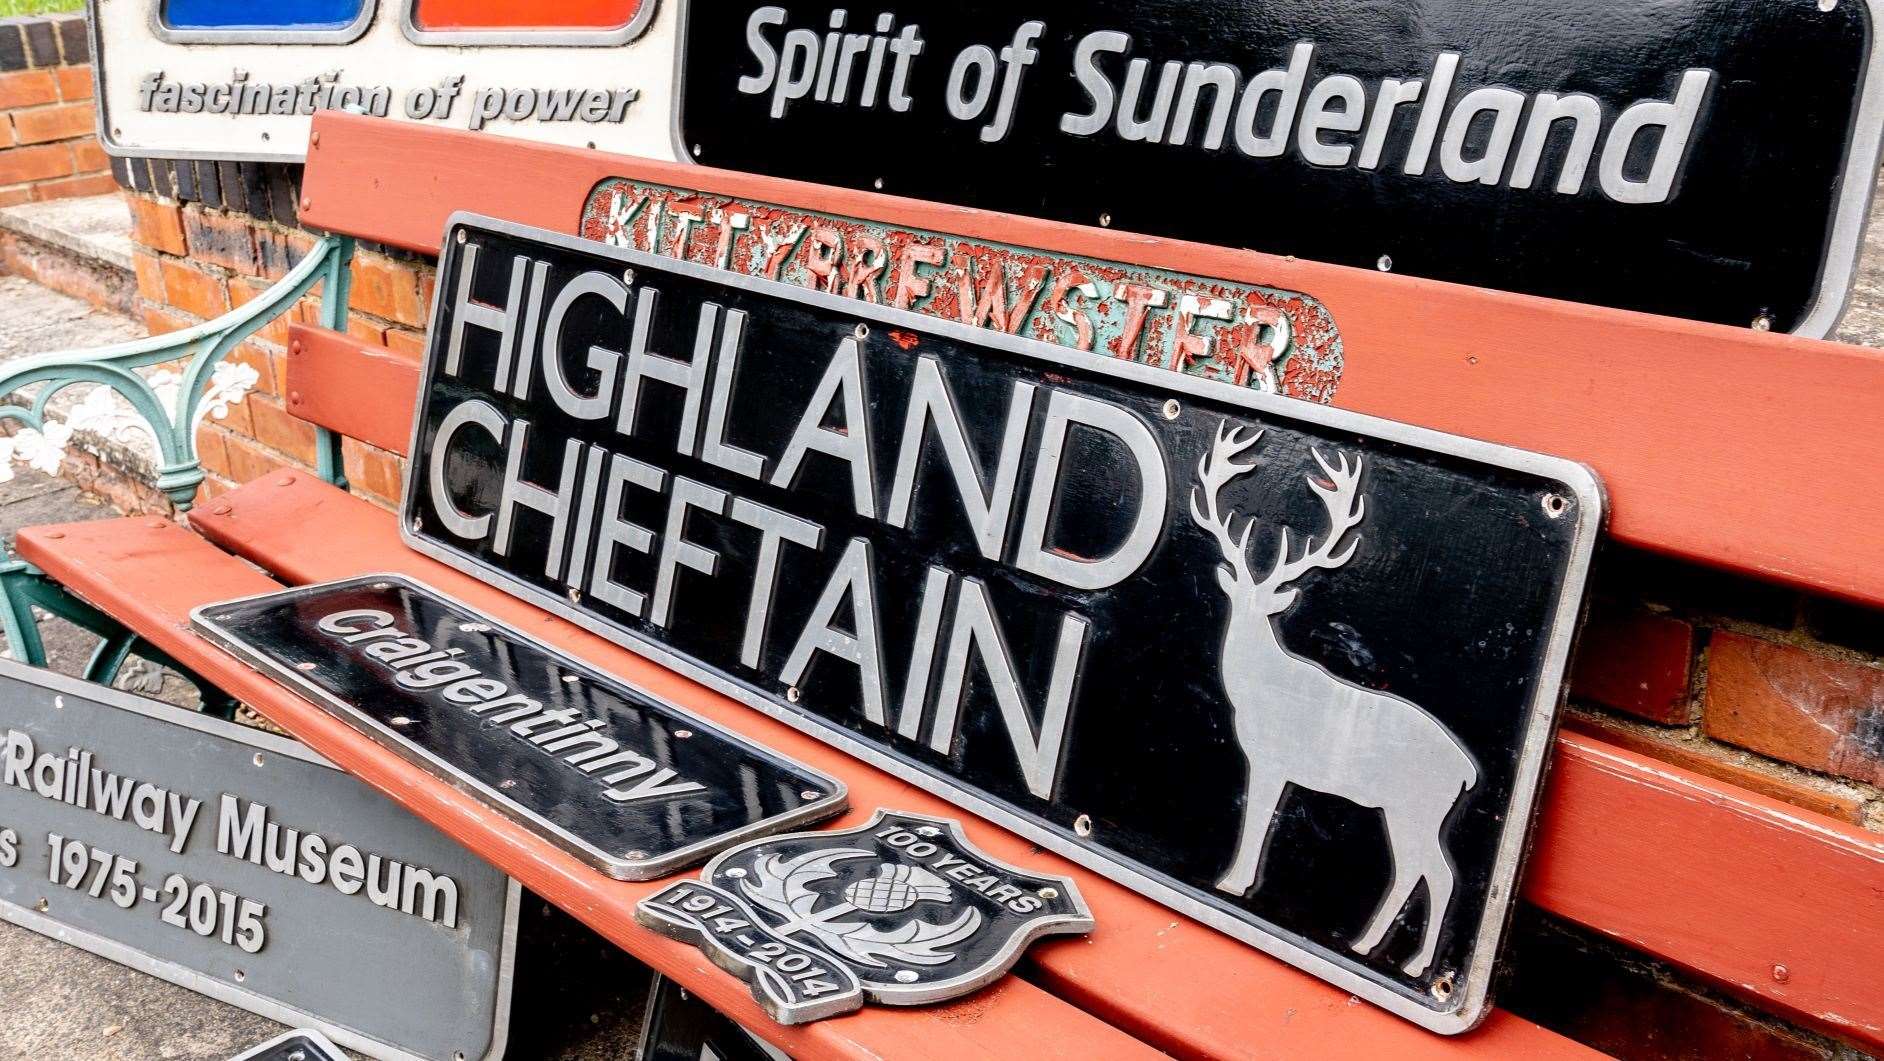 The Highland Chieftain plate is being auctioned for a great cause.